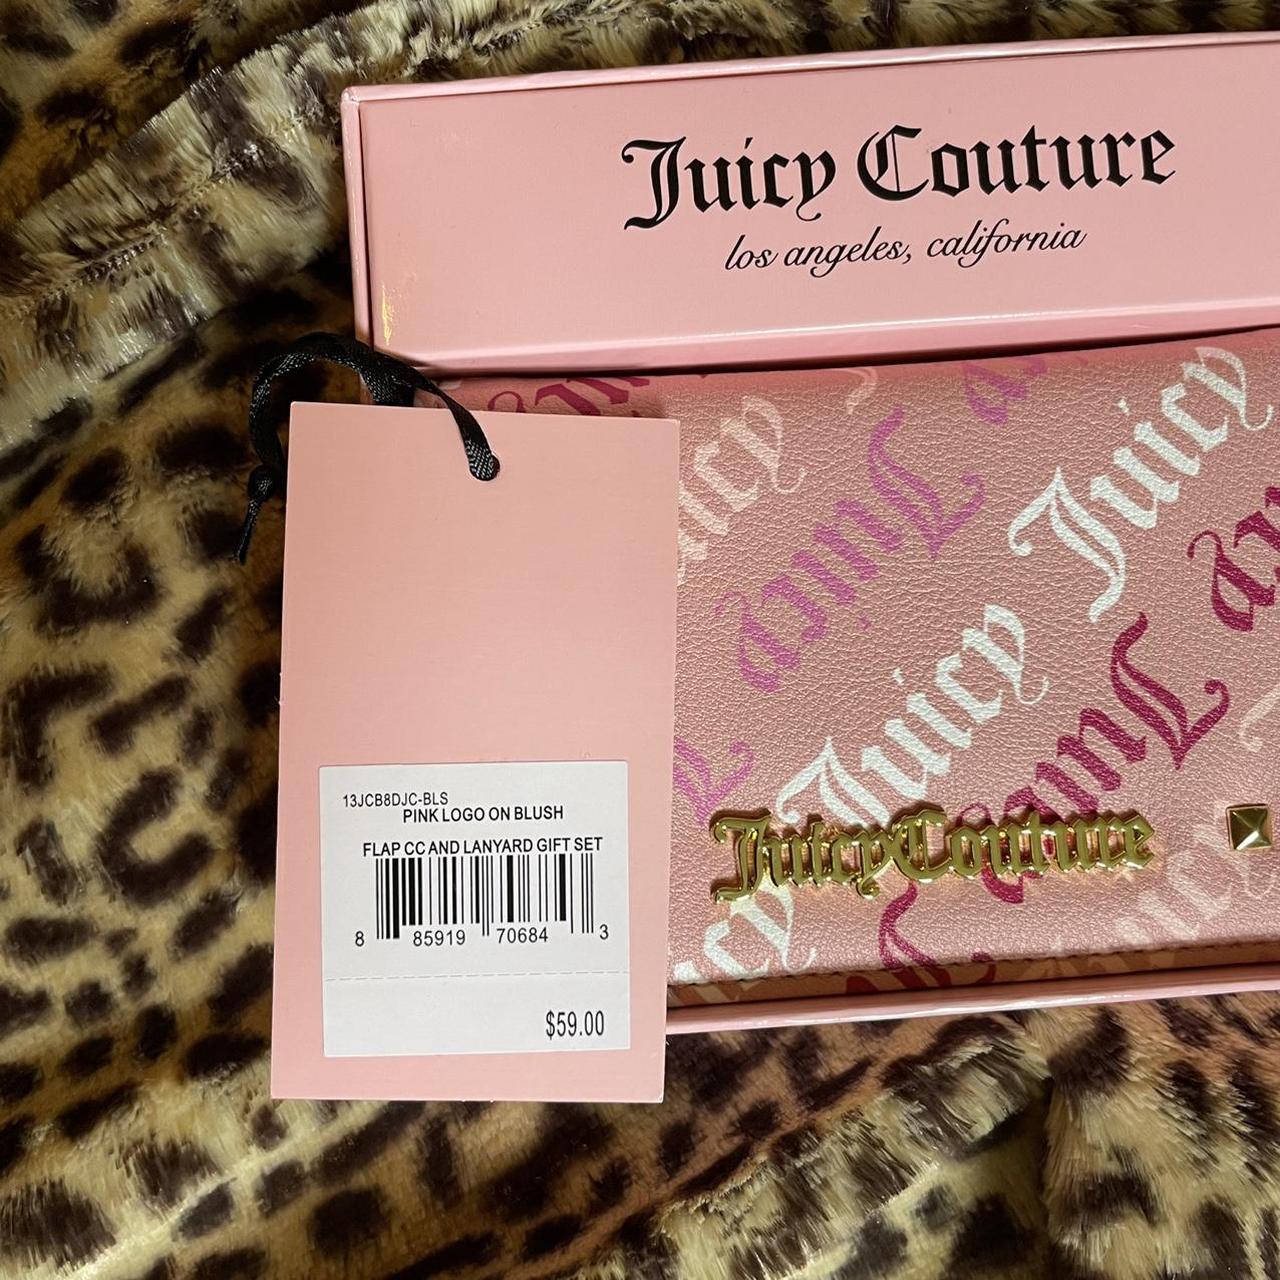 Juicy Couture Pink Set 💗💗 -34B bra and size small - Depop